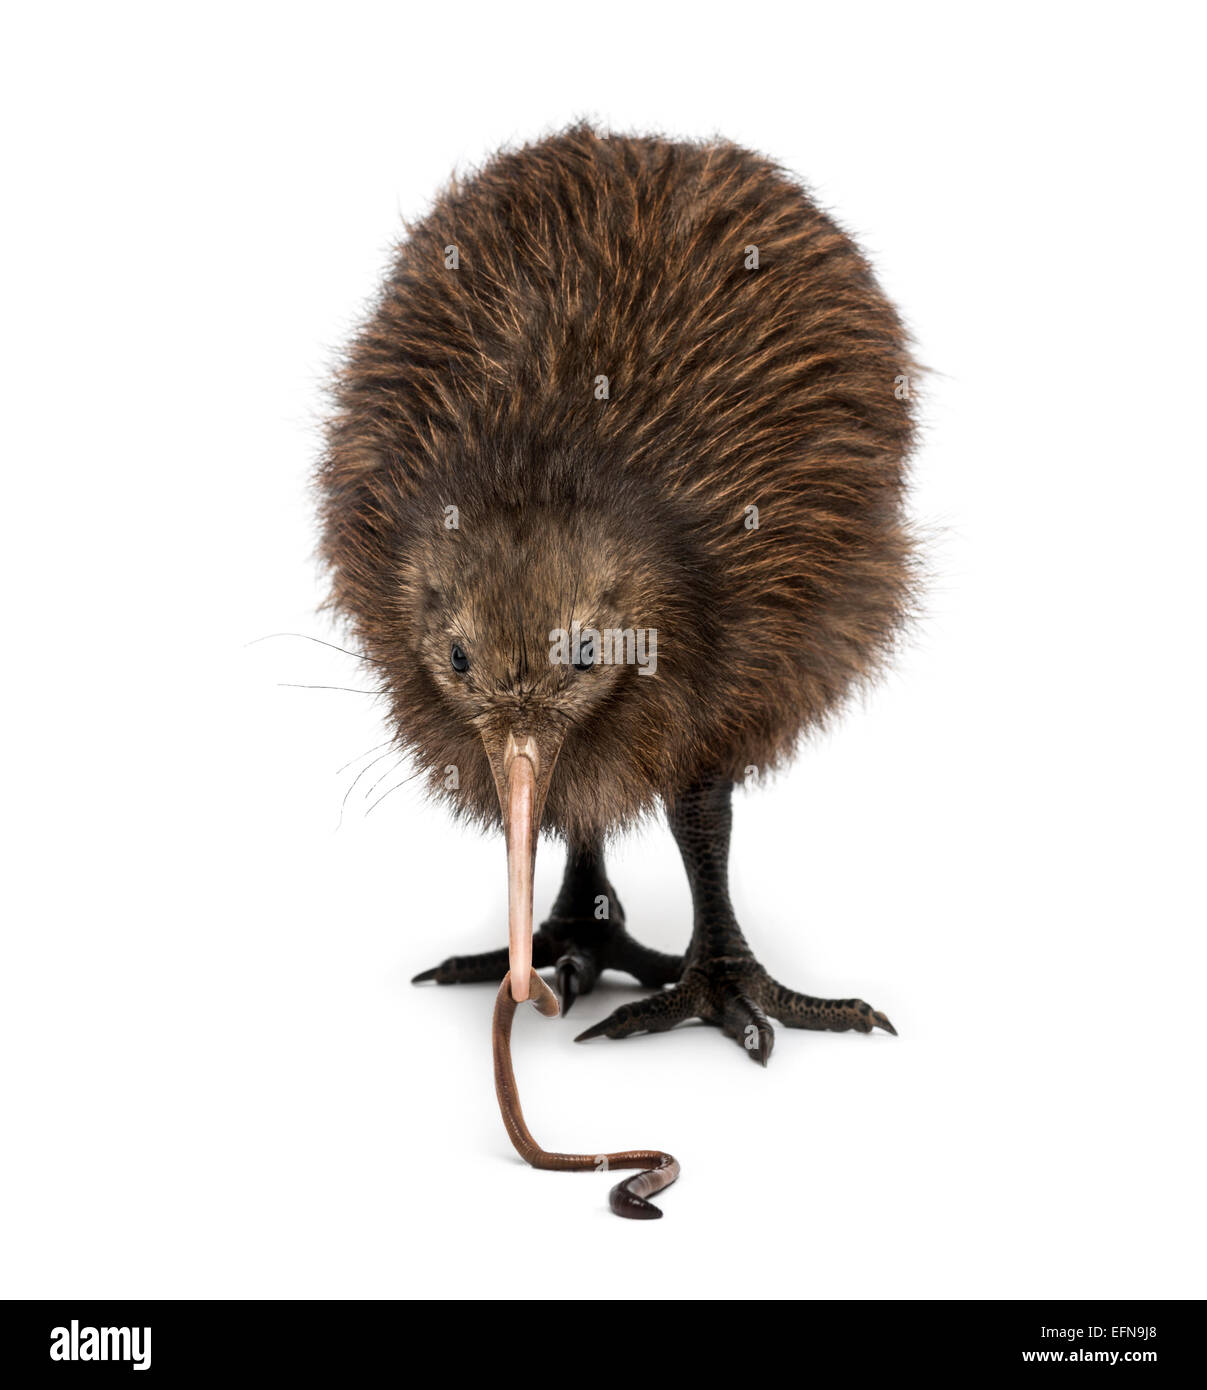 North Island Brown Kiwi eating an Earthworm Apteryx mantelli, 3 months old, against white background Stock Photo